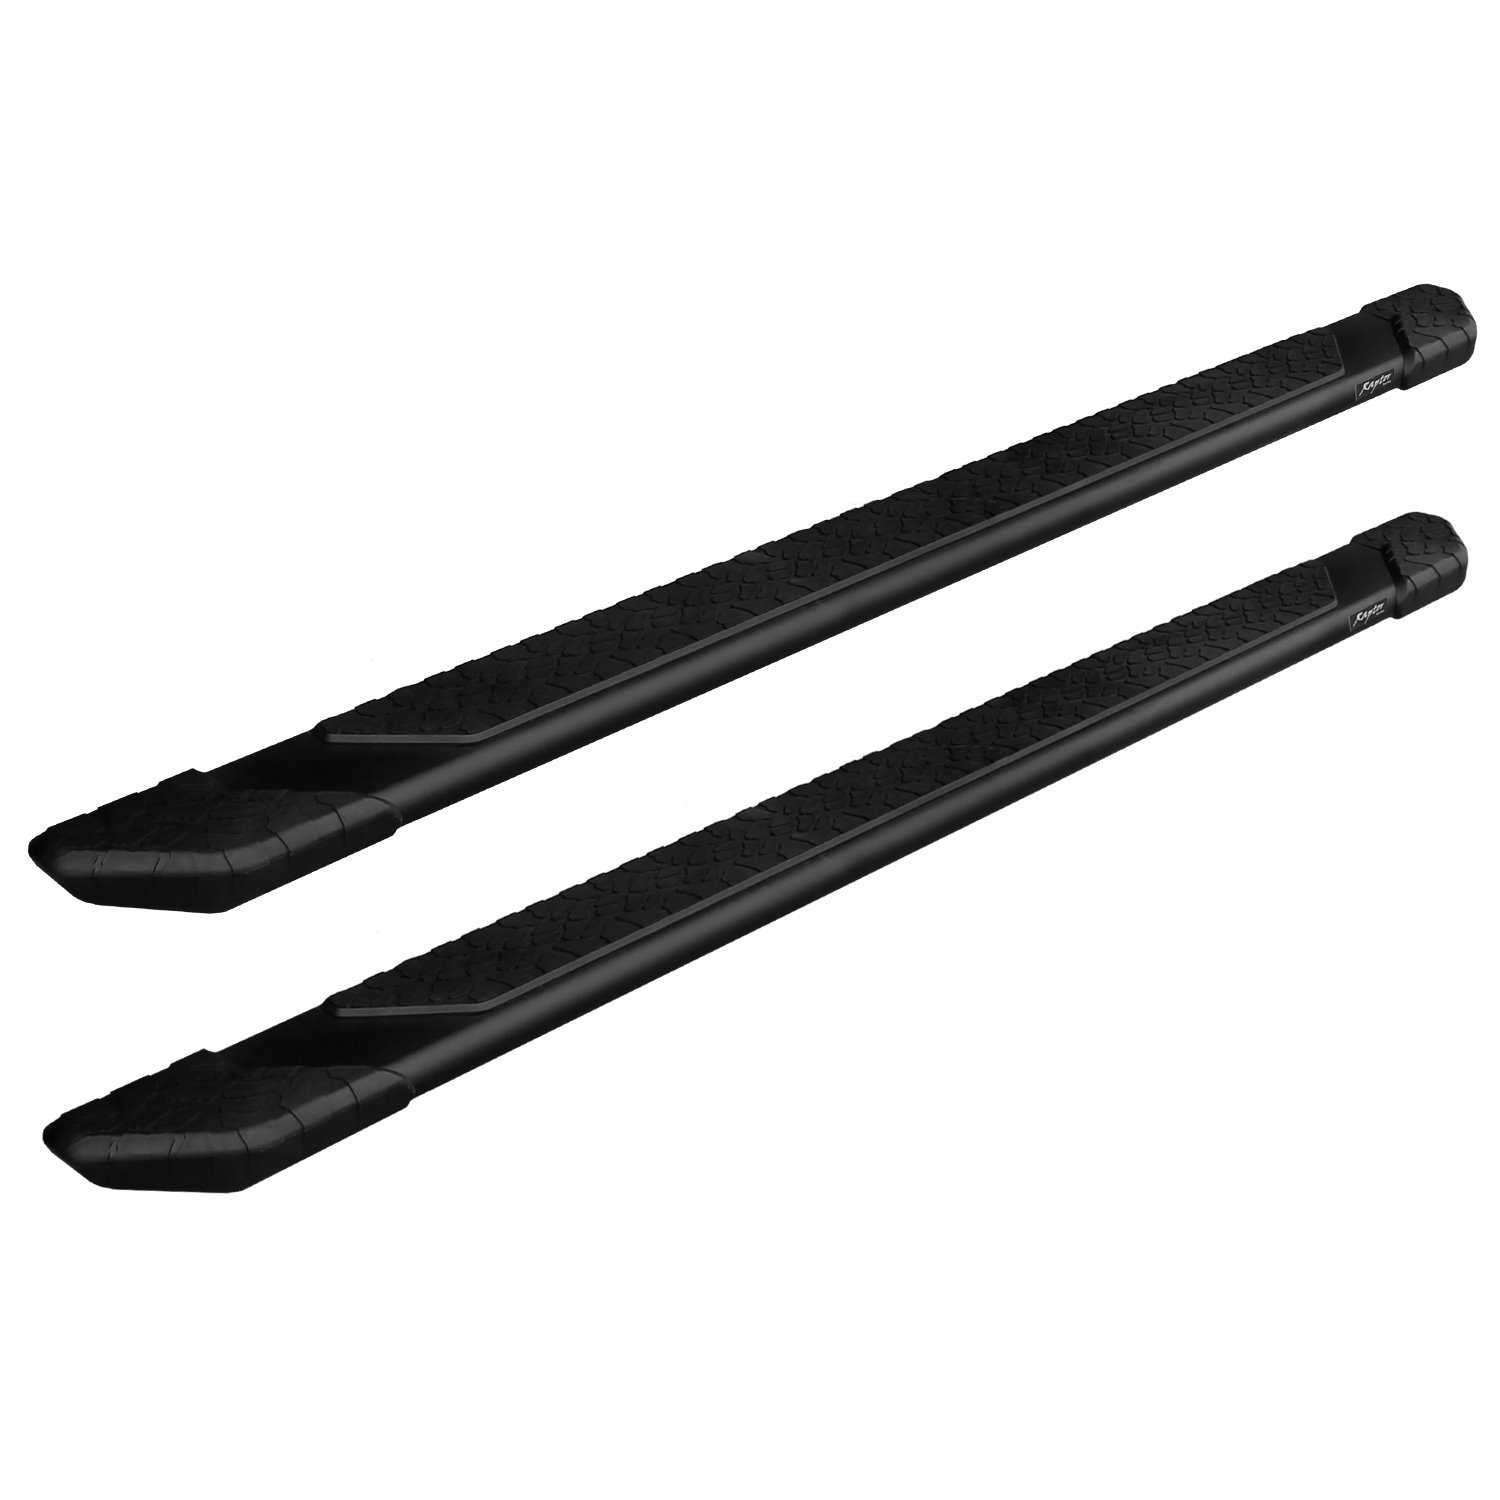 1904-0133BT 5 in Tread Step Slide Track Running Boards, Black Aluminum, Fits Select Toyota Tundra Double Cab